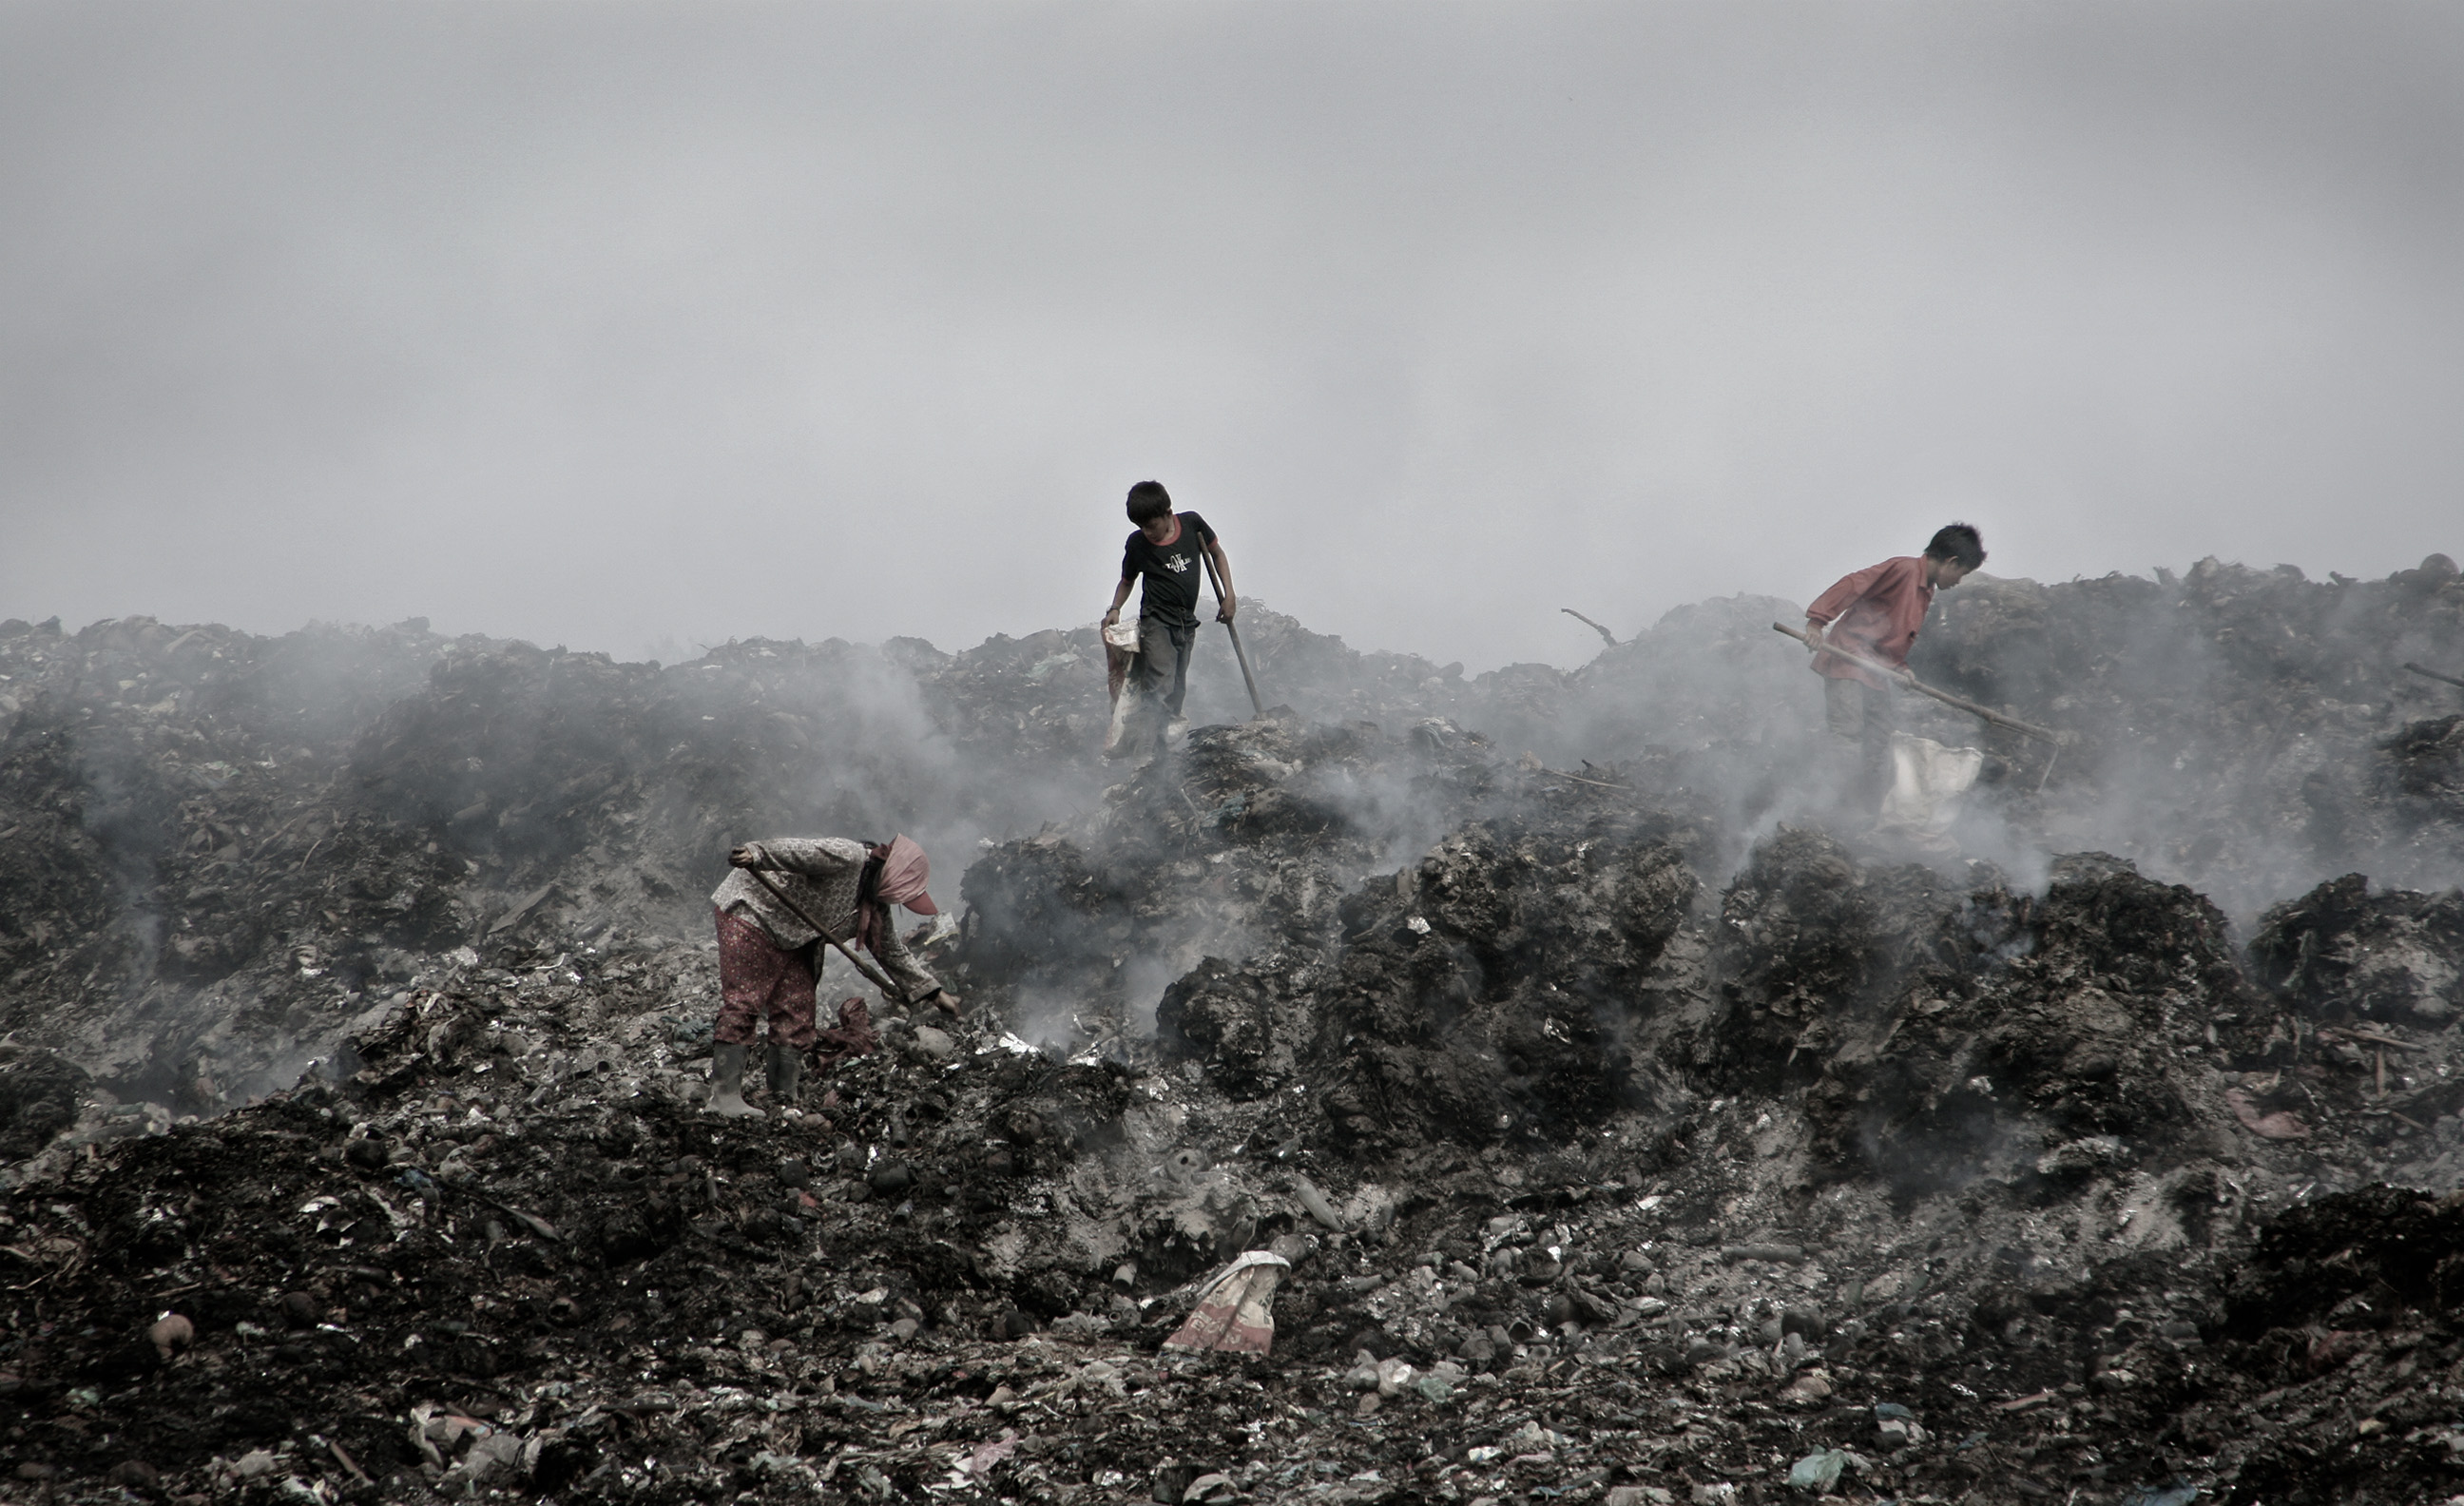 Workers walk across a smoky, smoldering mountain of waste in search for any last items that have been left behind that can still be salvaged for recycling. Any items found are put into their bags that are strapped around their waist.